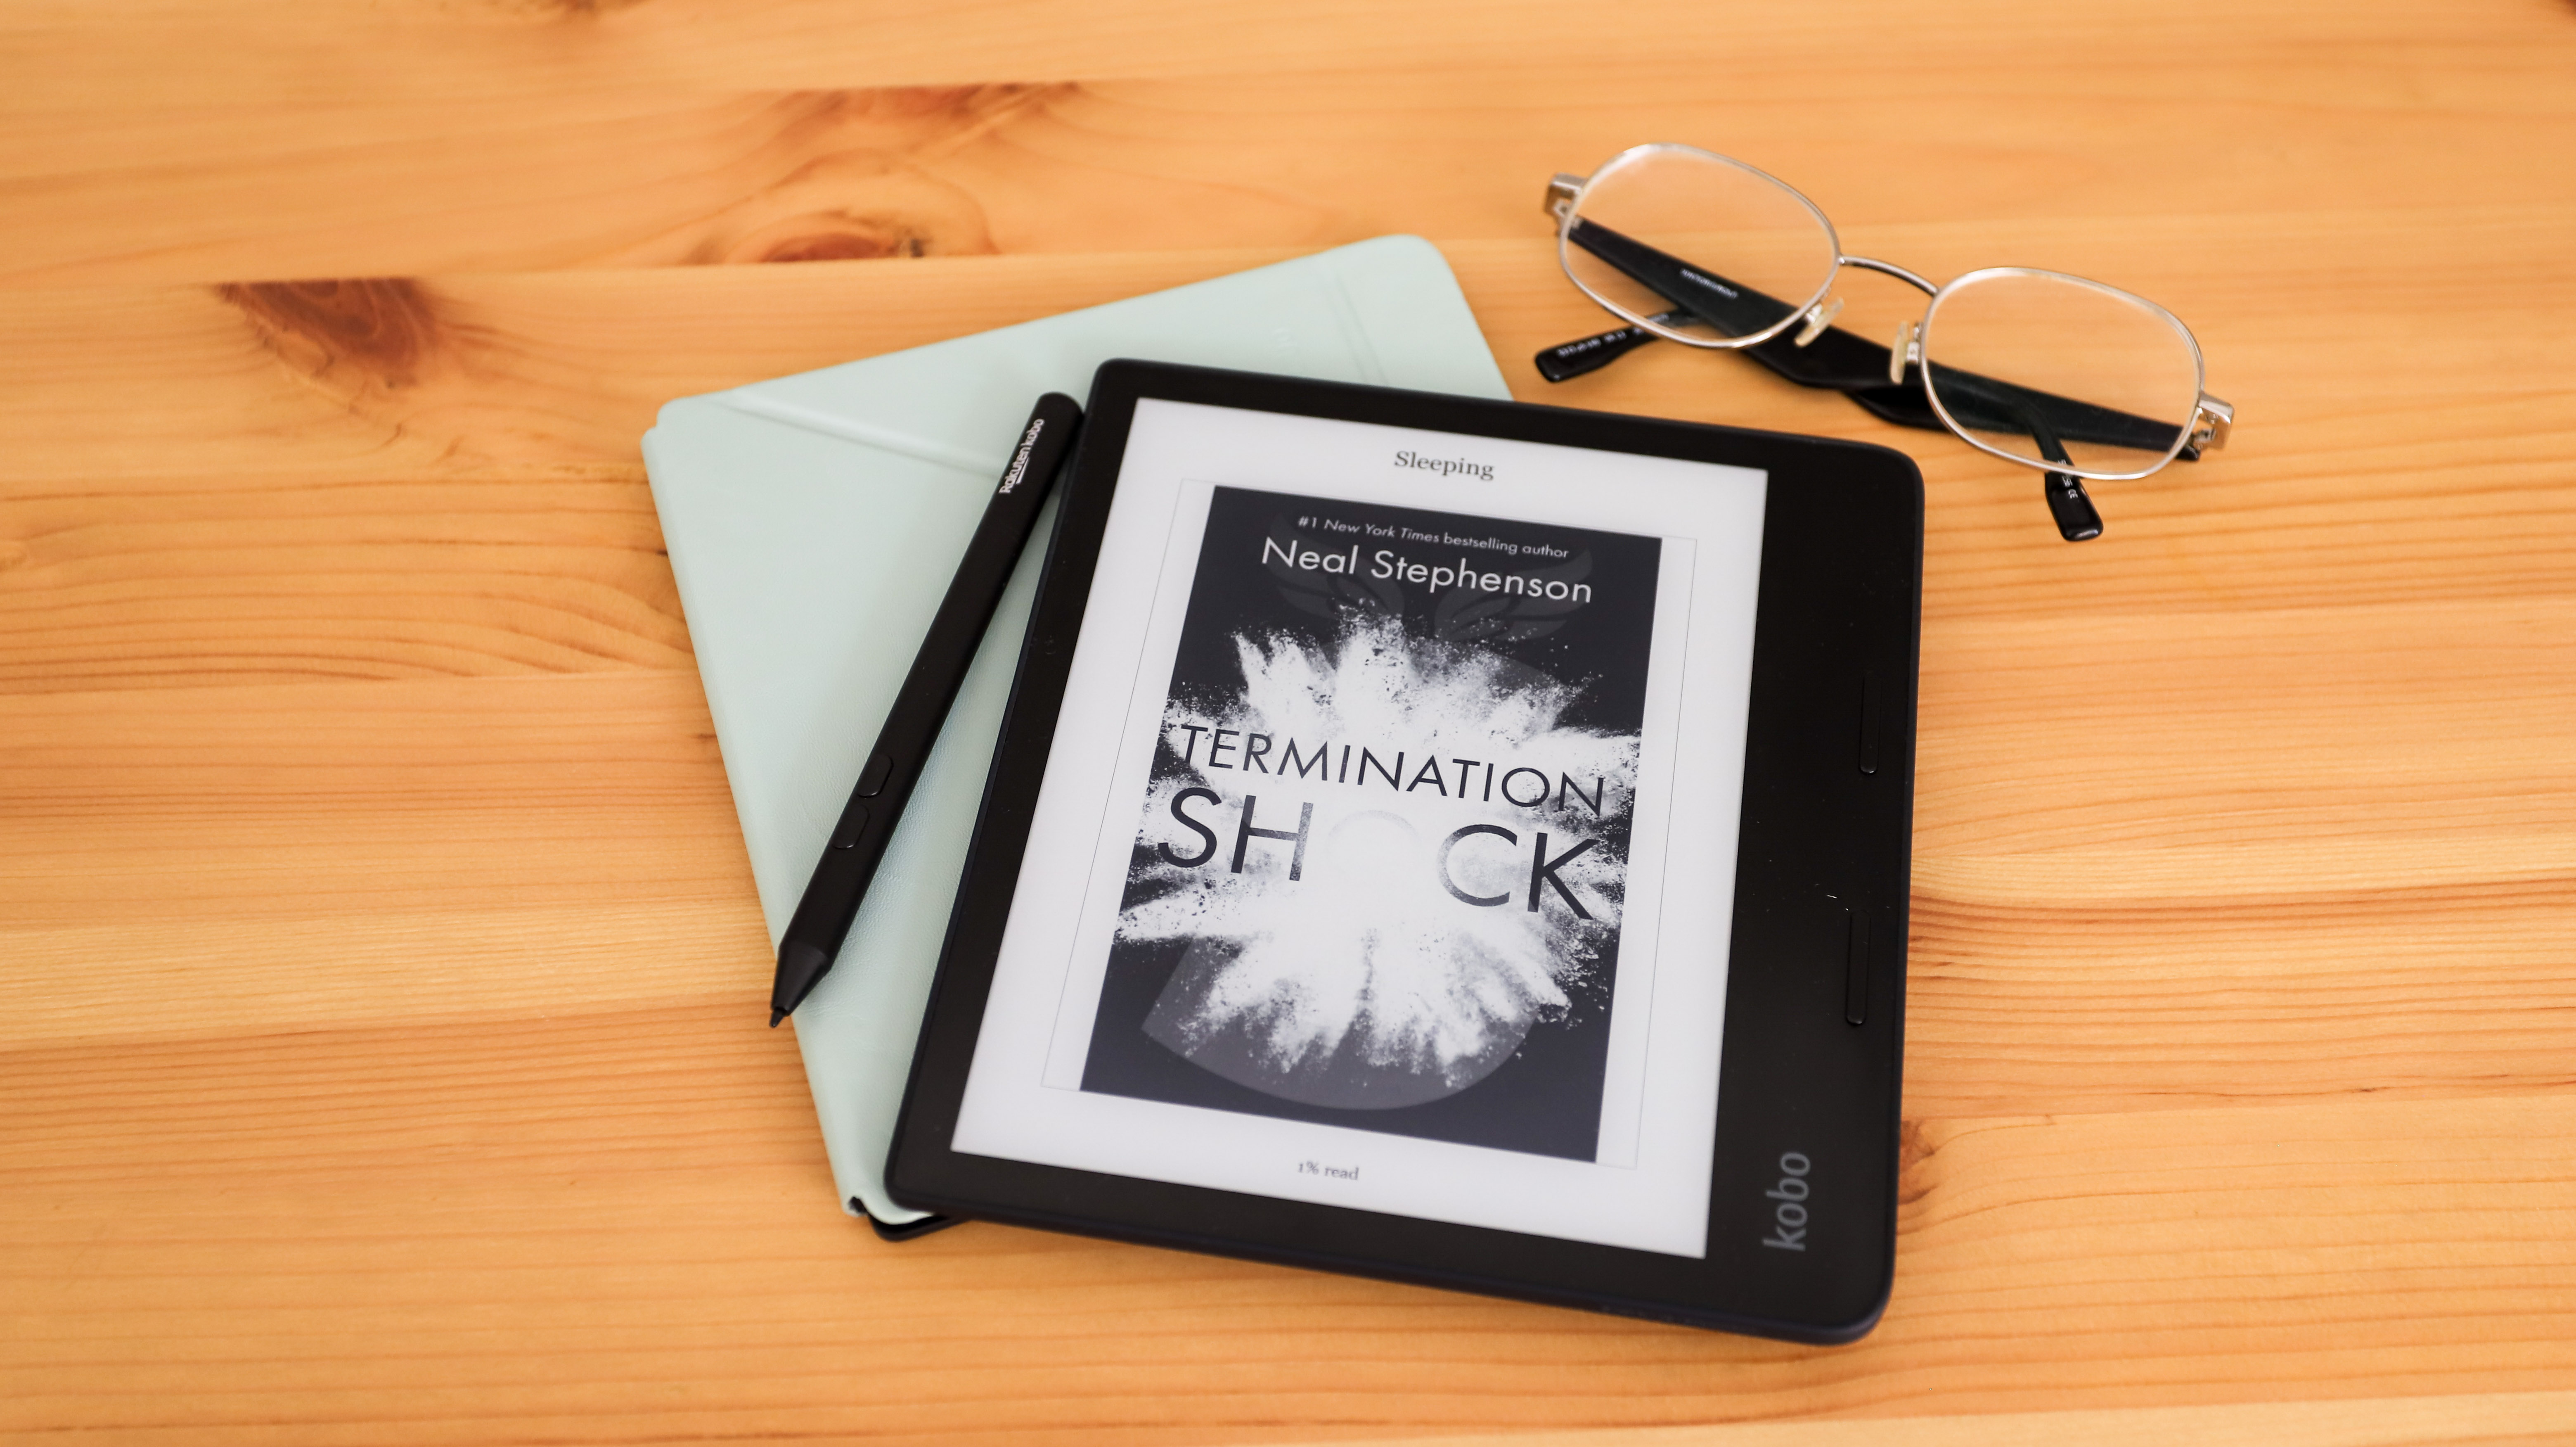 Kindle 8th Generation 2016 Review - Good e-Reader